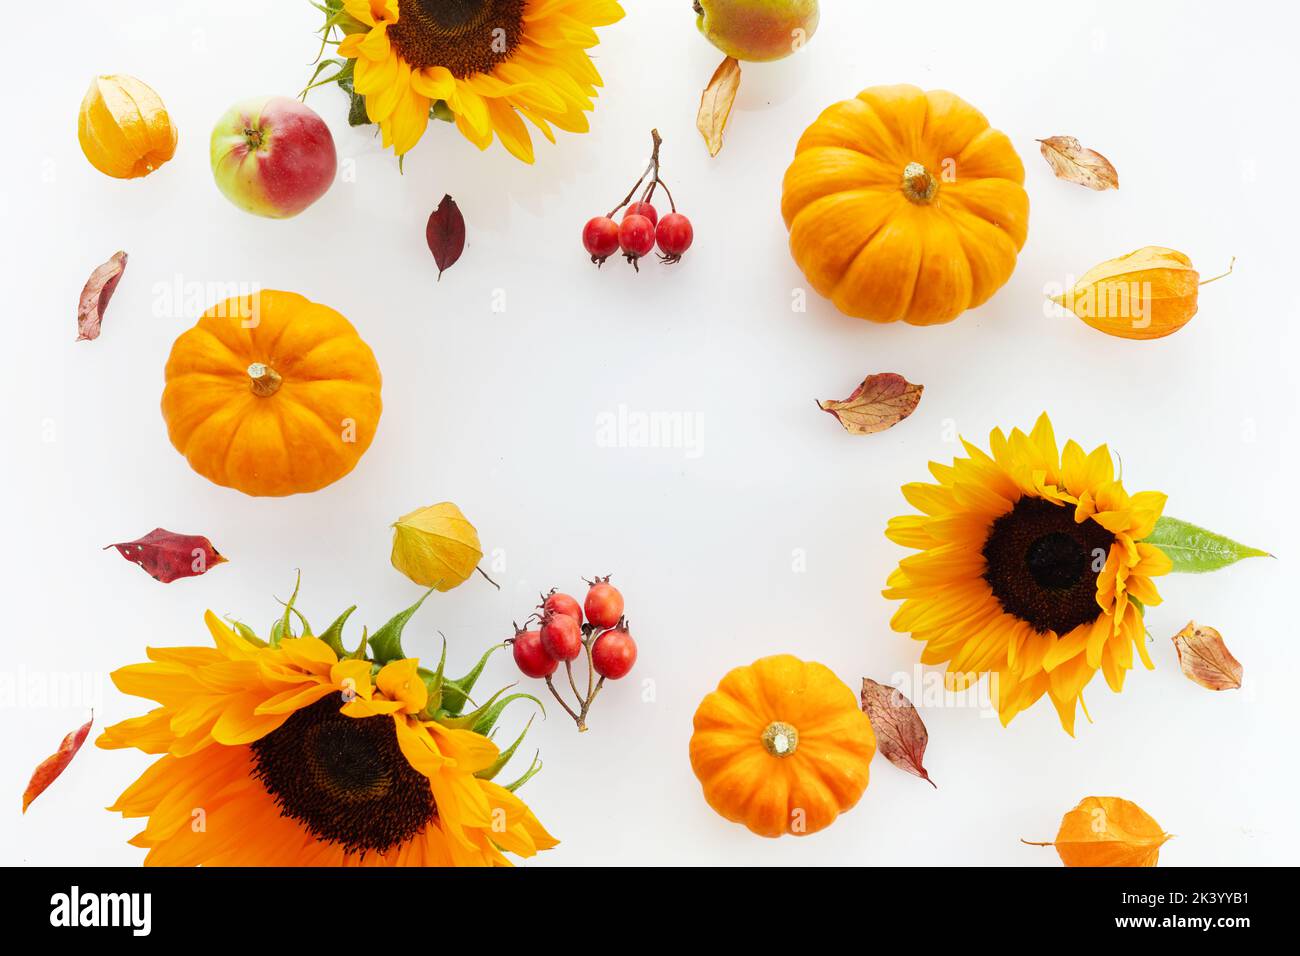 Autumn composition. Pumpkins, sunflowers, hawthorn on white background. Autumn, fall, thanksgiving day concept. Stock Photo